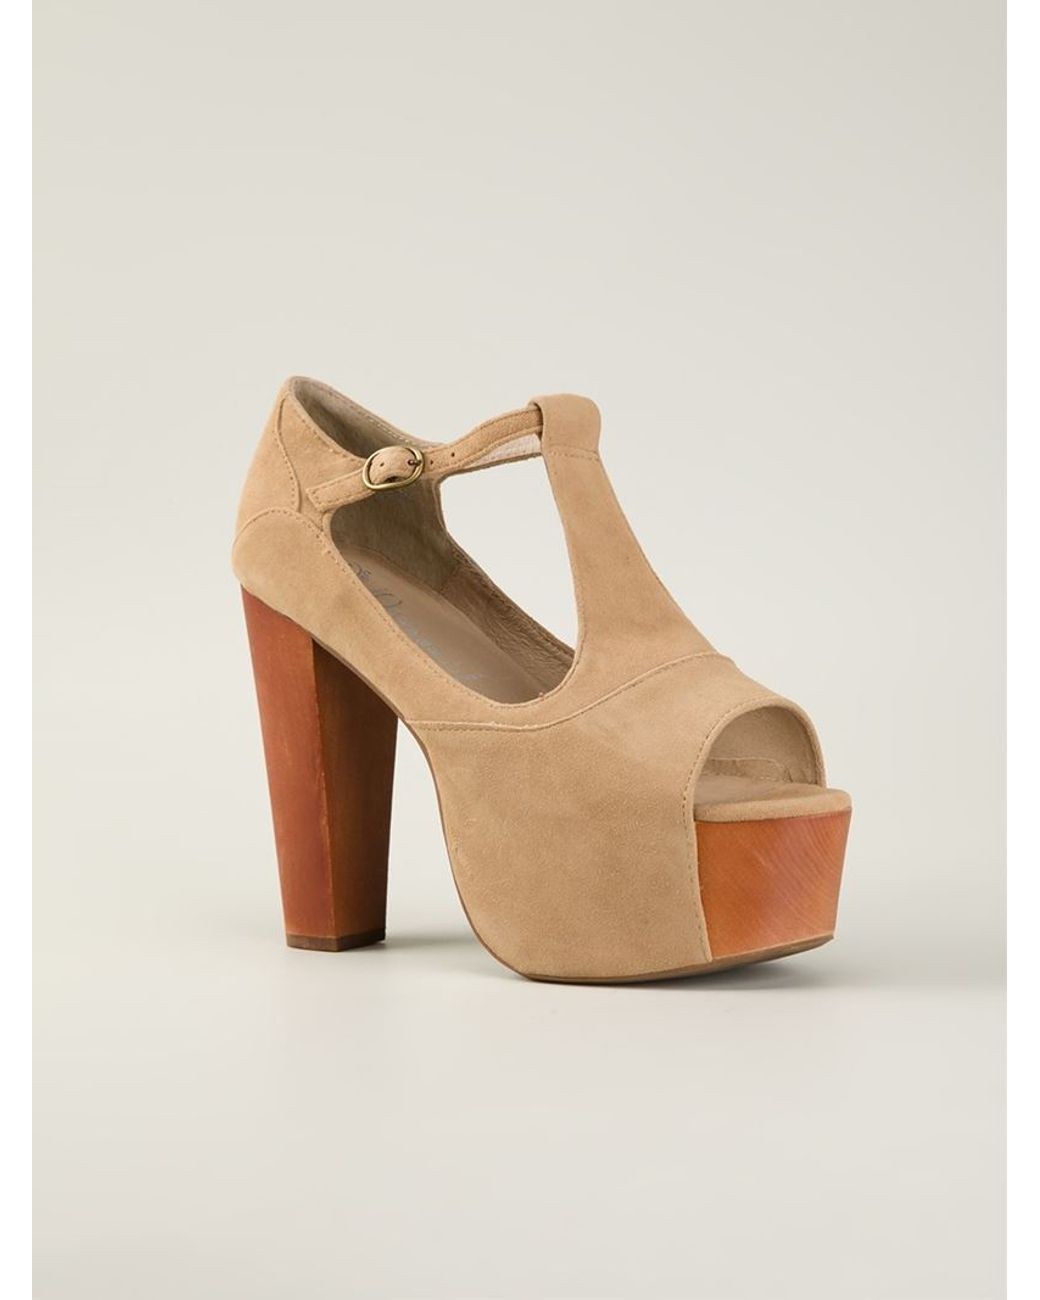 Jeffrey Campbell 'foxy Wood' Platform Sandals in Natural | Lyst